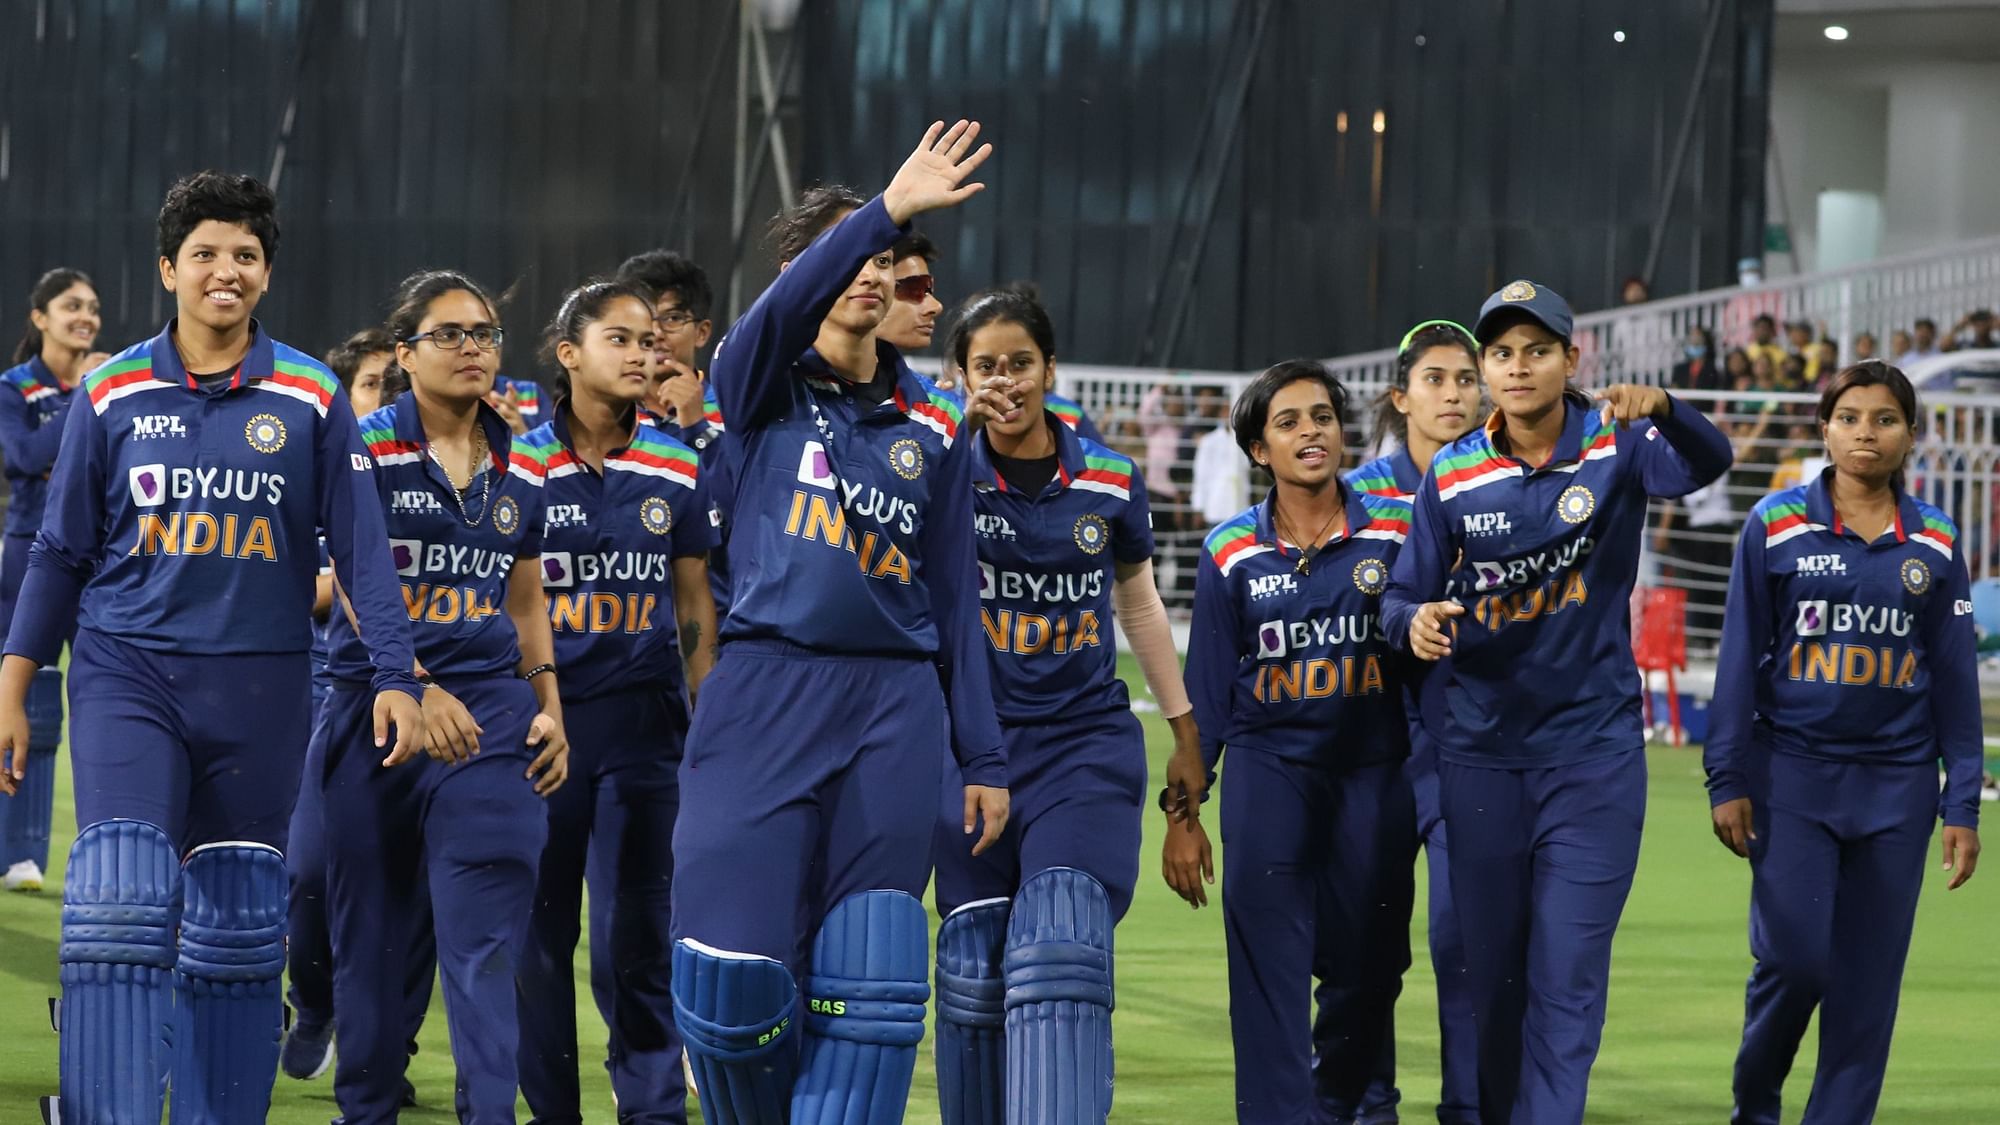 India’s women’s cricket team beat South Africa by nine wickets in the third and final T20 International on Tuesday.